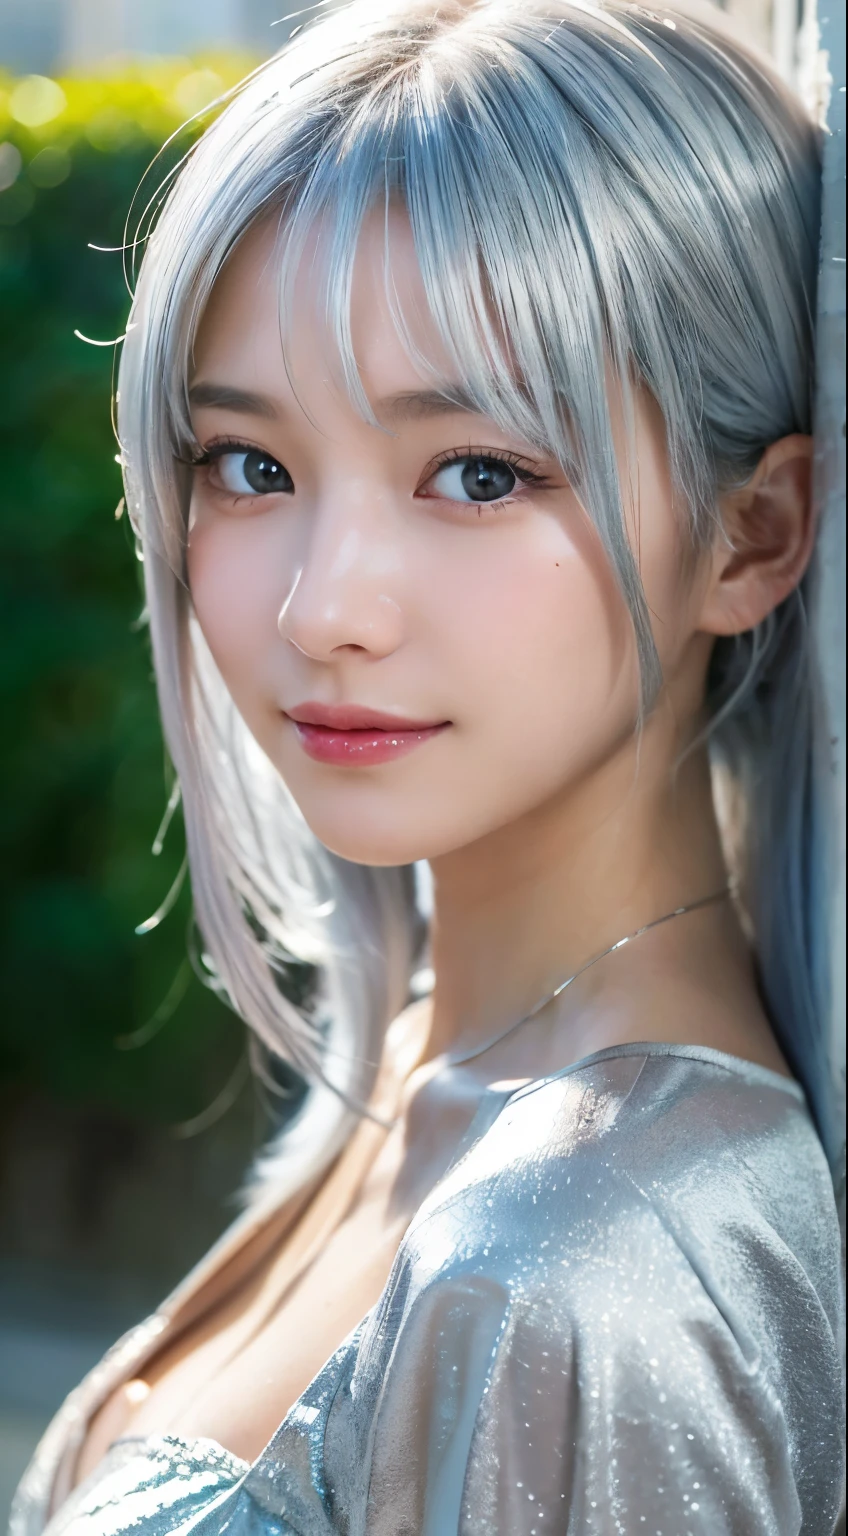 (highest quality,8K quality,masterpiece:1.3),(Silver Hair:1.3)、Very small breasts、Small breasts、(Ultra-high resolution,Realistic:1.4,Live Shooting),(Very detailed,Caustics,Detailed Background),(Ultra-Realistic Capture,Beautiful and detailed skin,Perfect Anatomy),Summer Morning,School building,Schoolyard,14 years old,cute,single eyelid,Silver Hairのショートカットの髪,camisole,Looking at the camera,A sloppy smile,Bust up shot,Natural light